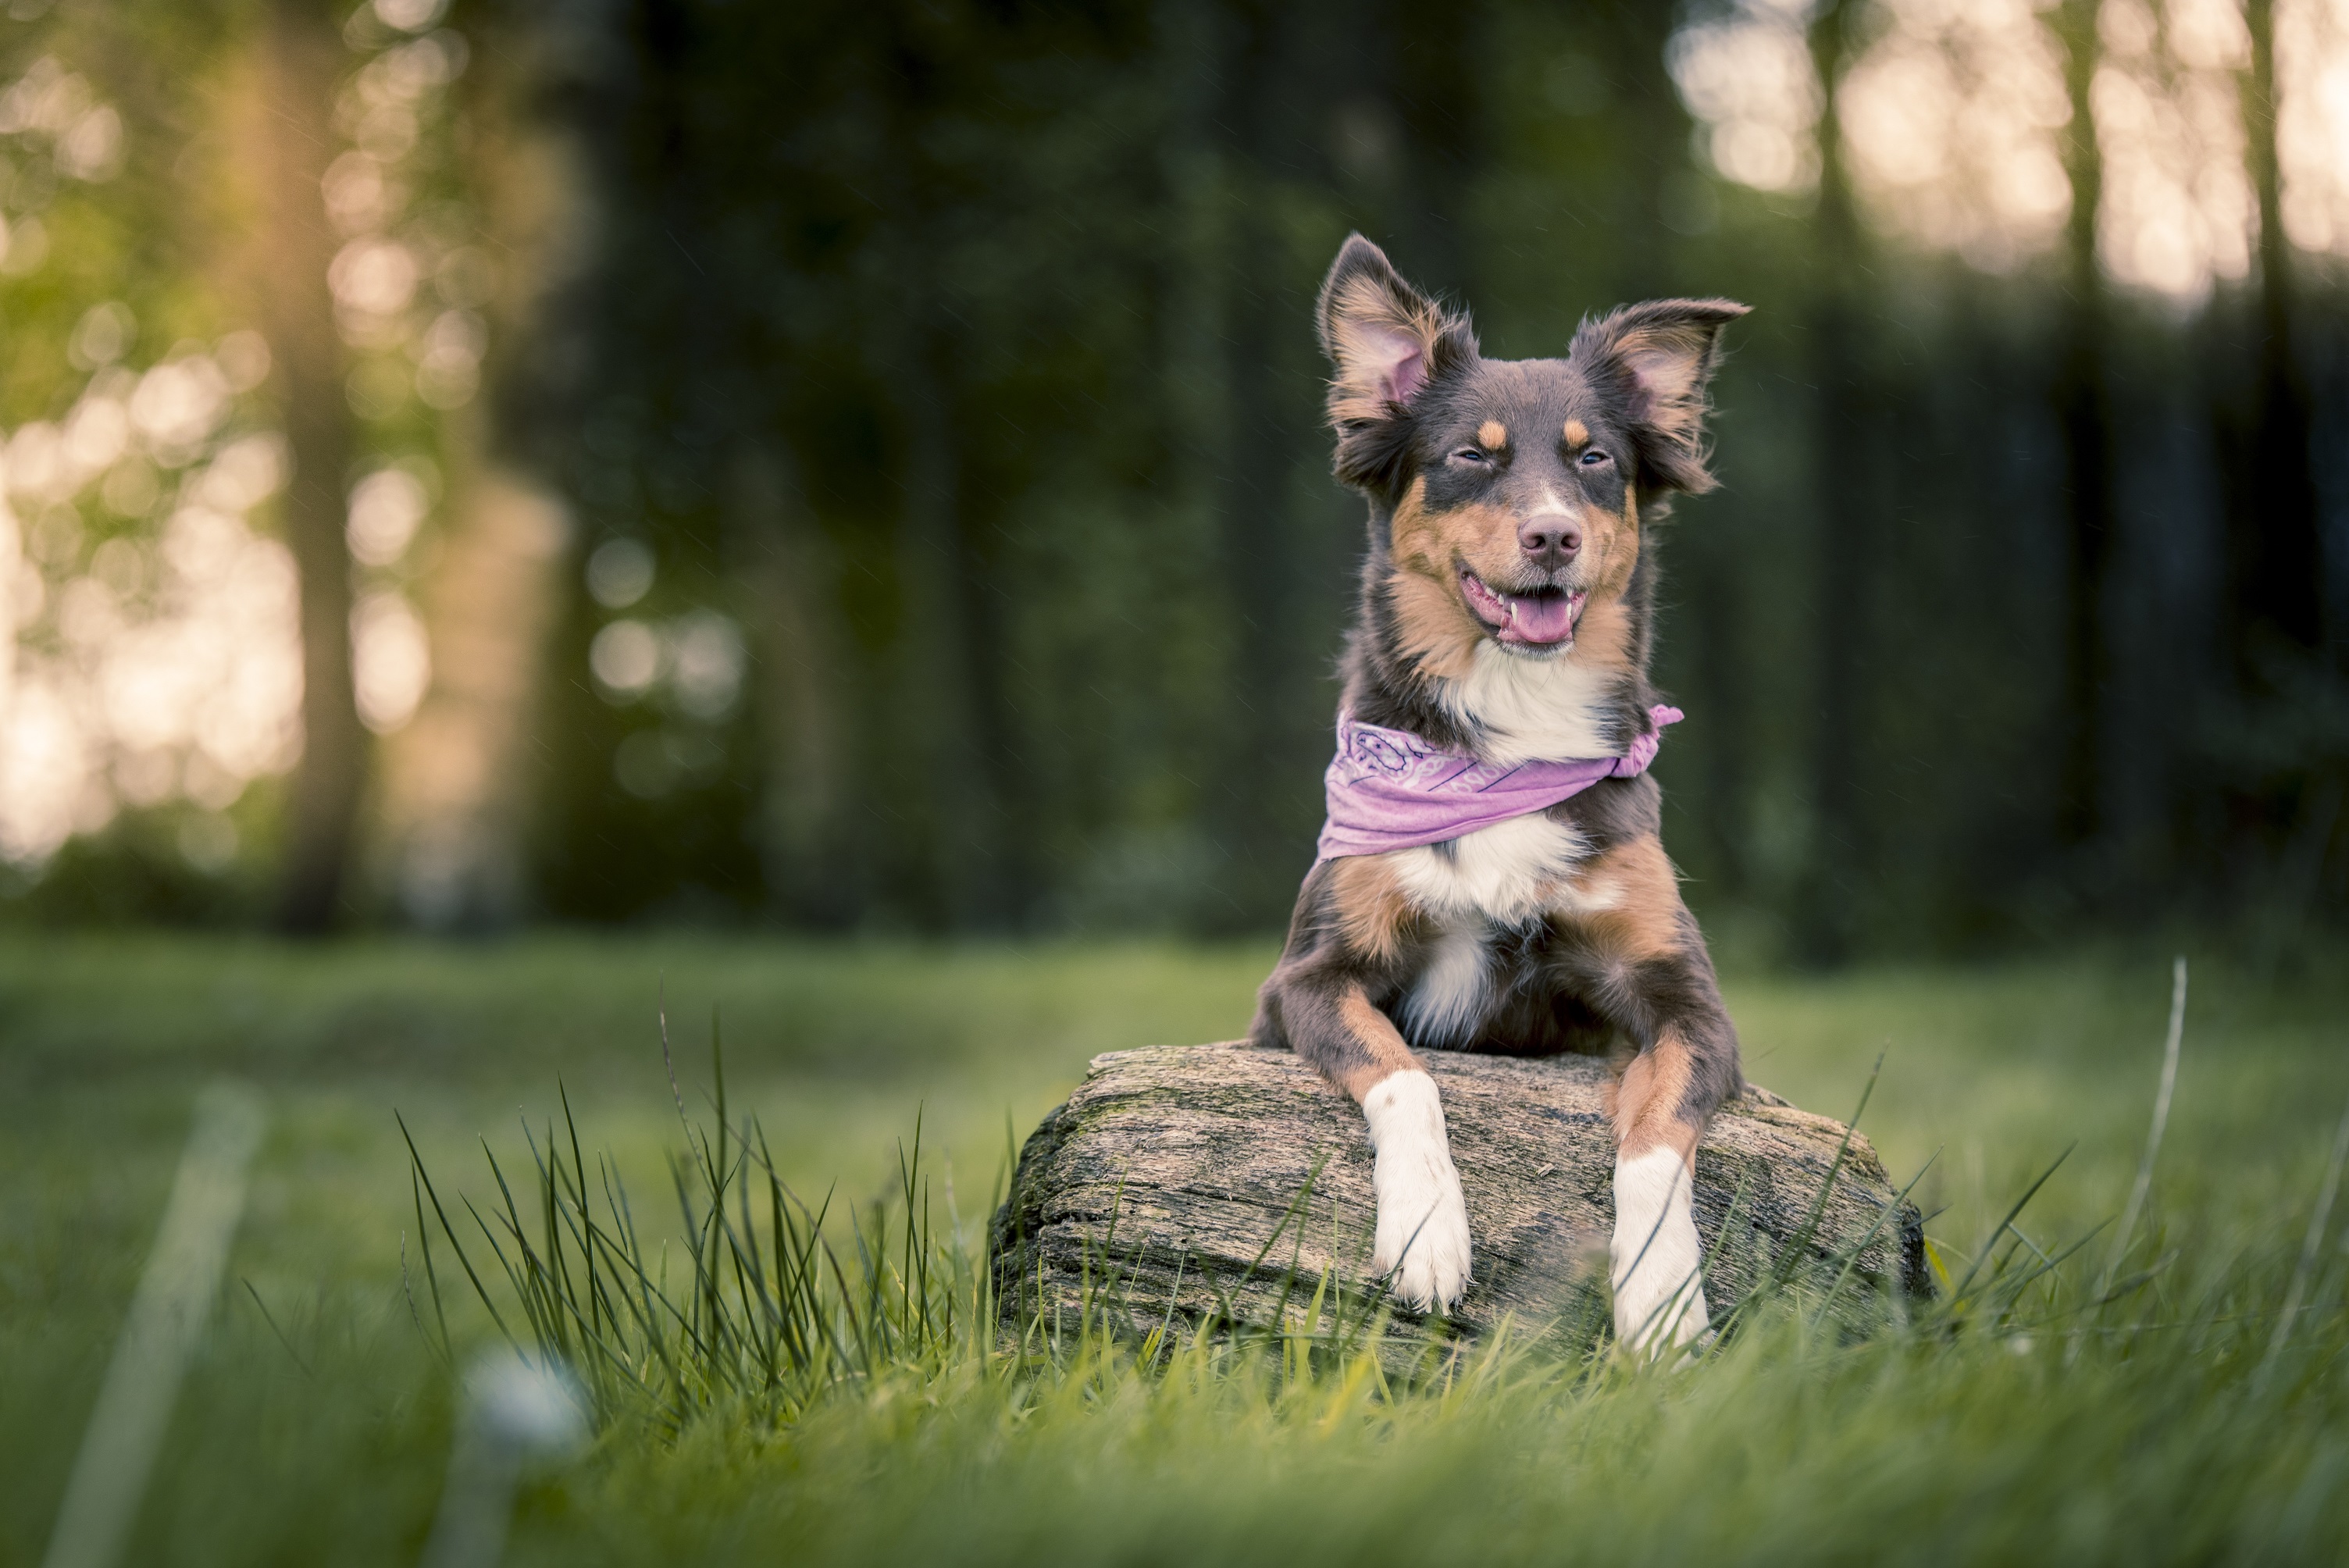 Cute Little Dog with Bandana by Andreas D.